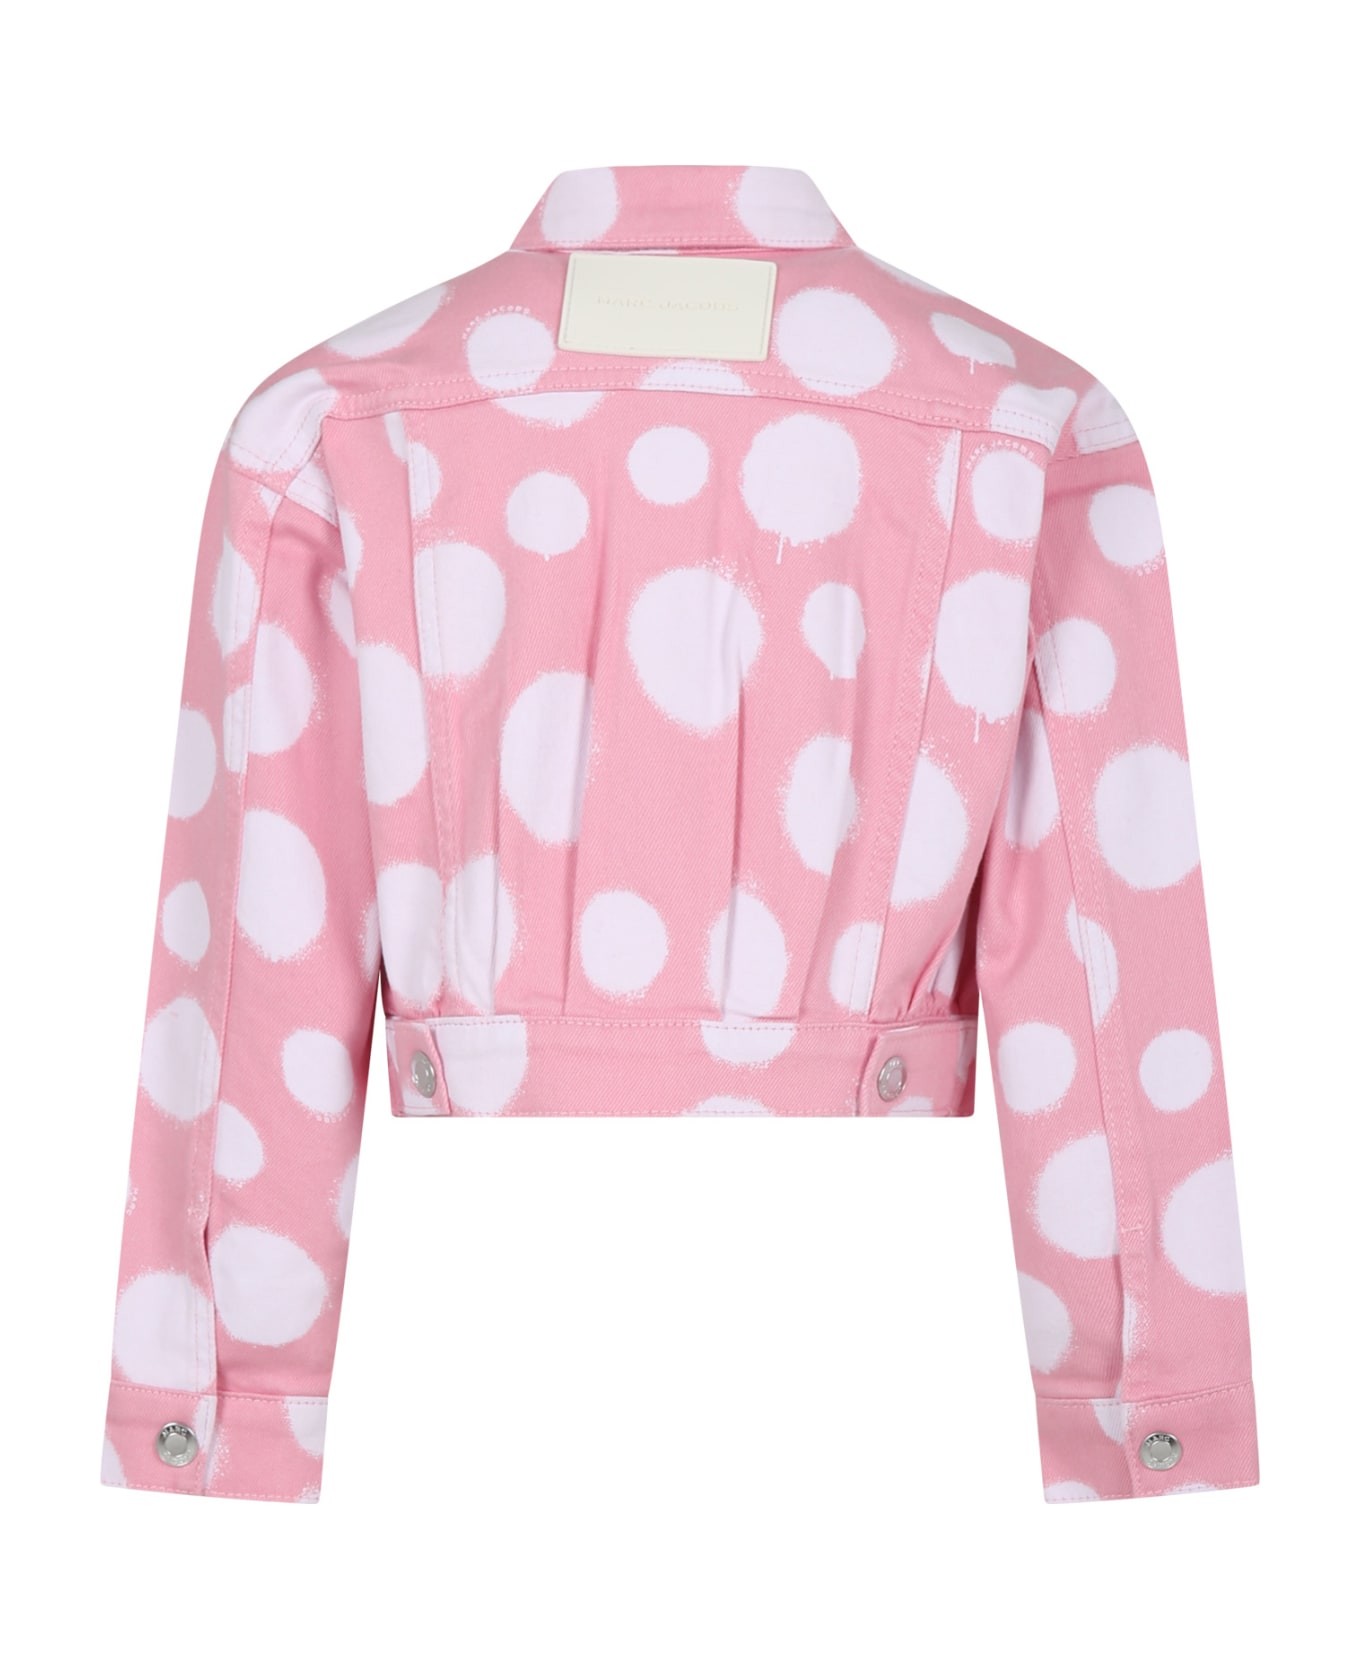 Marc Jacobs Pink Denim Jacket For Girl With Polka Dots - Pink